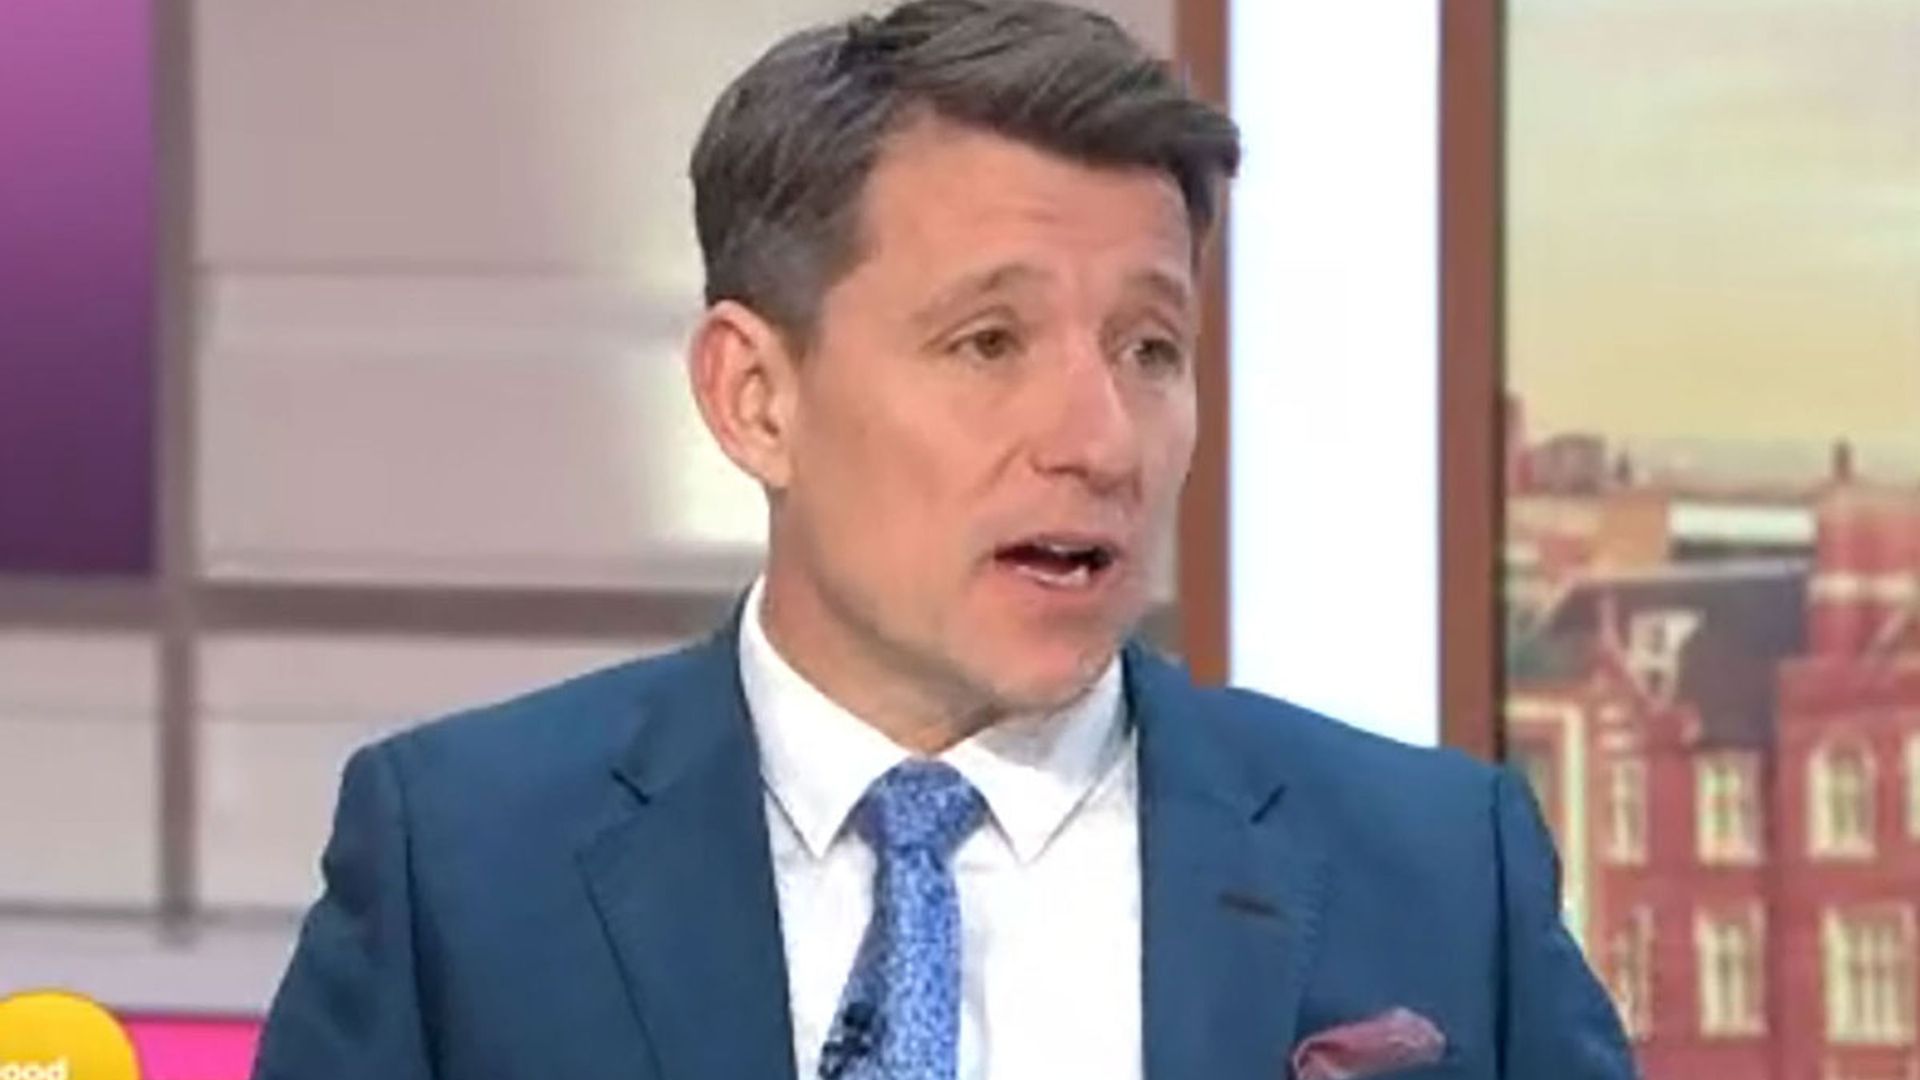 Ben Shephard addresses reports about him looking tired on GMB